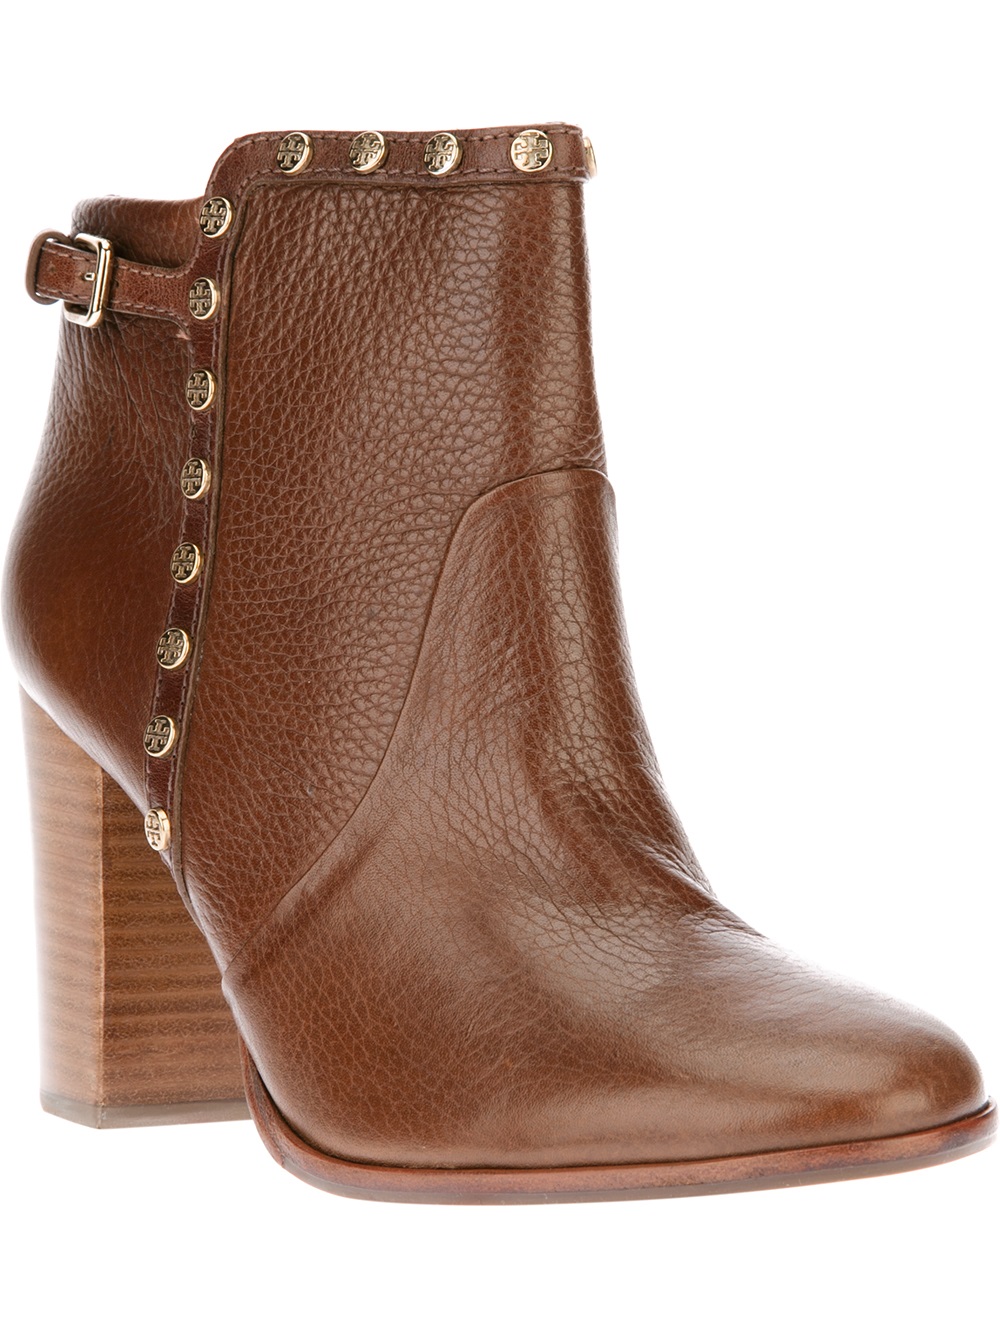 Lyst - Tory Burch Studded Ankle Boot in Brown